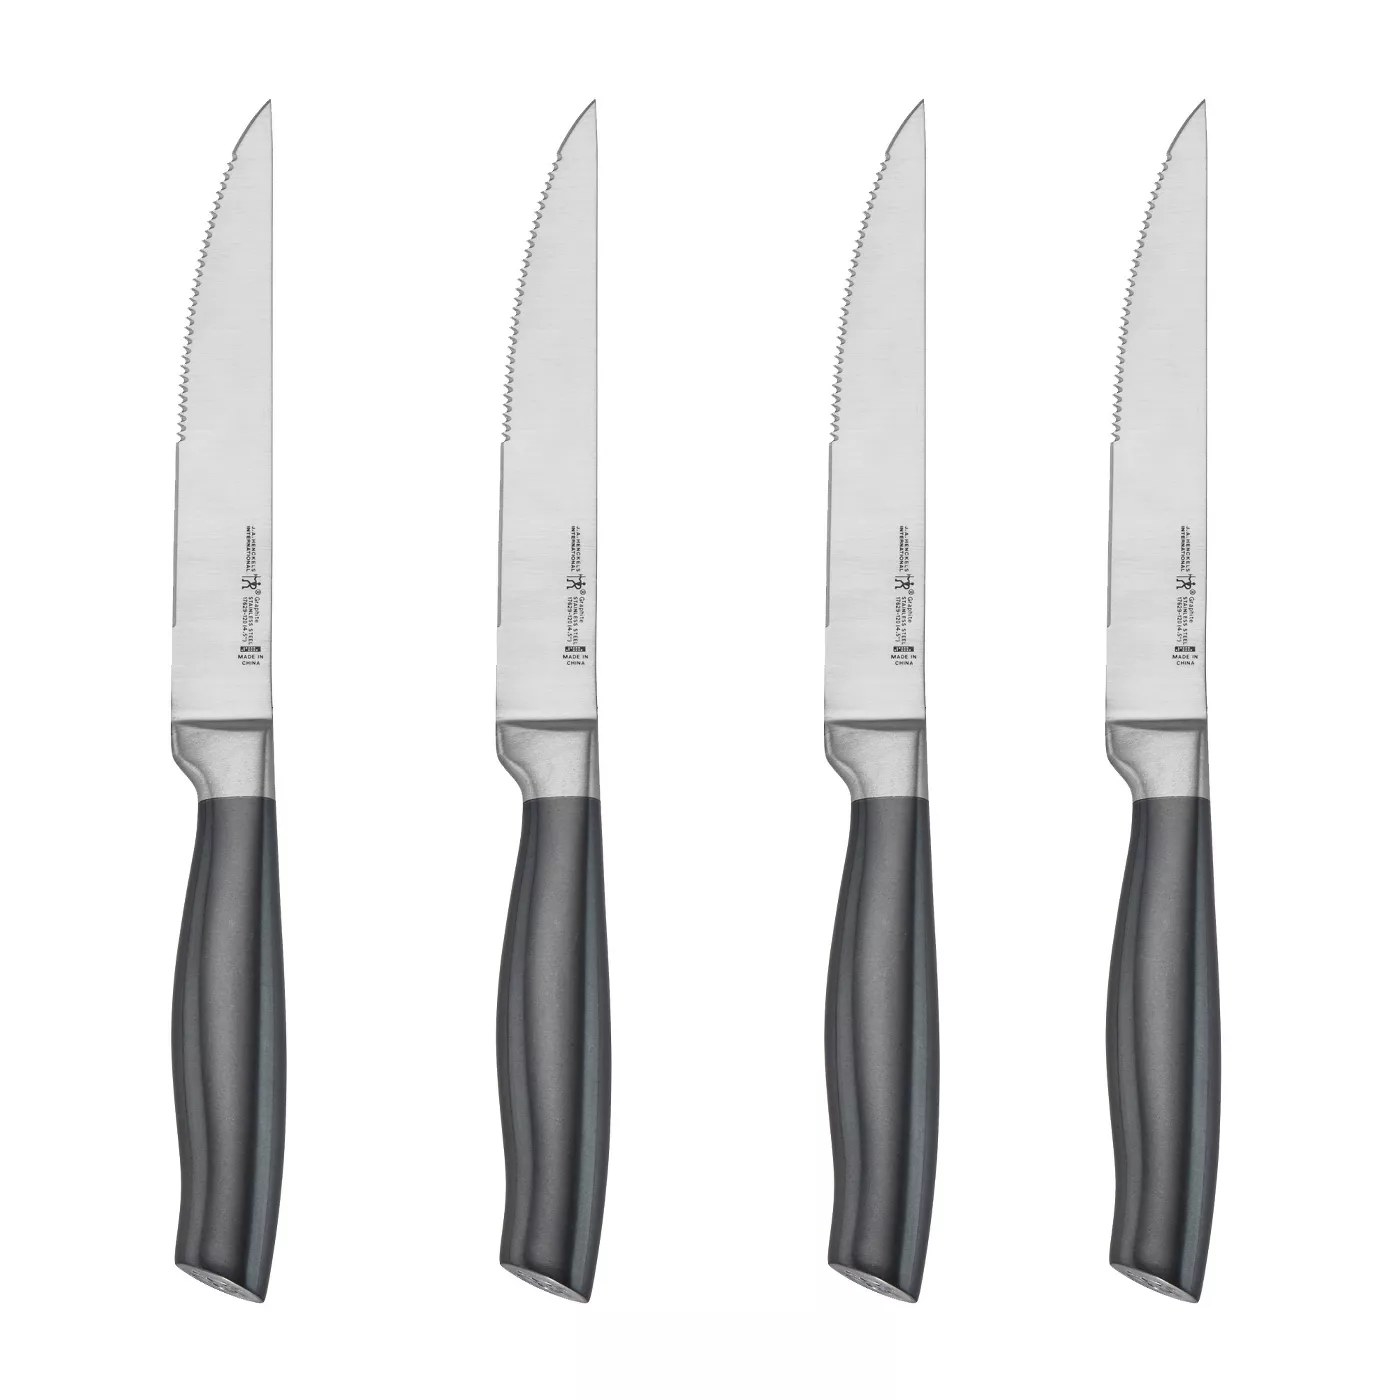 Four stainless steel steak knives with graphite handles